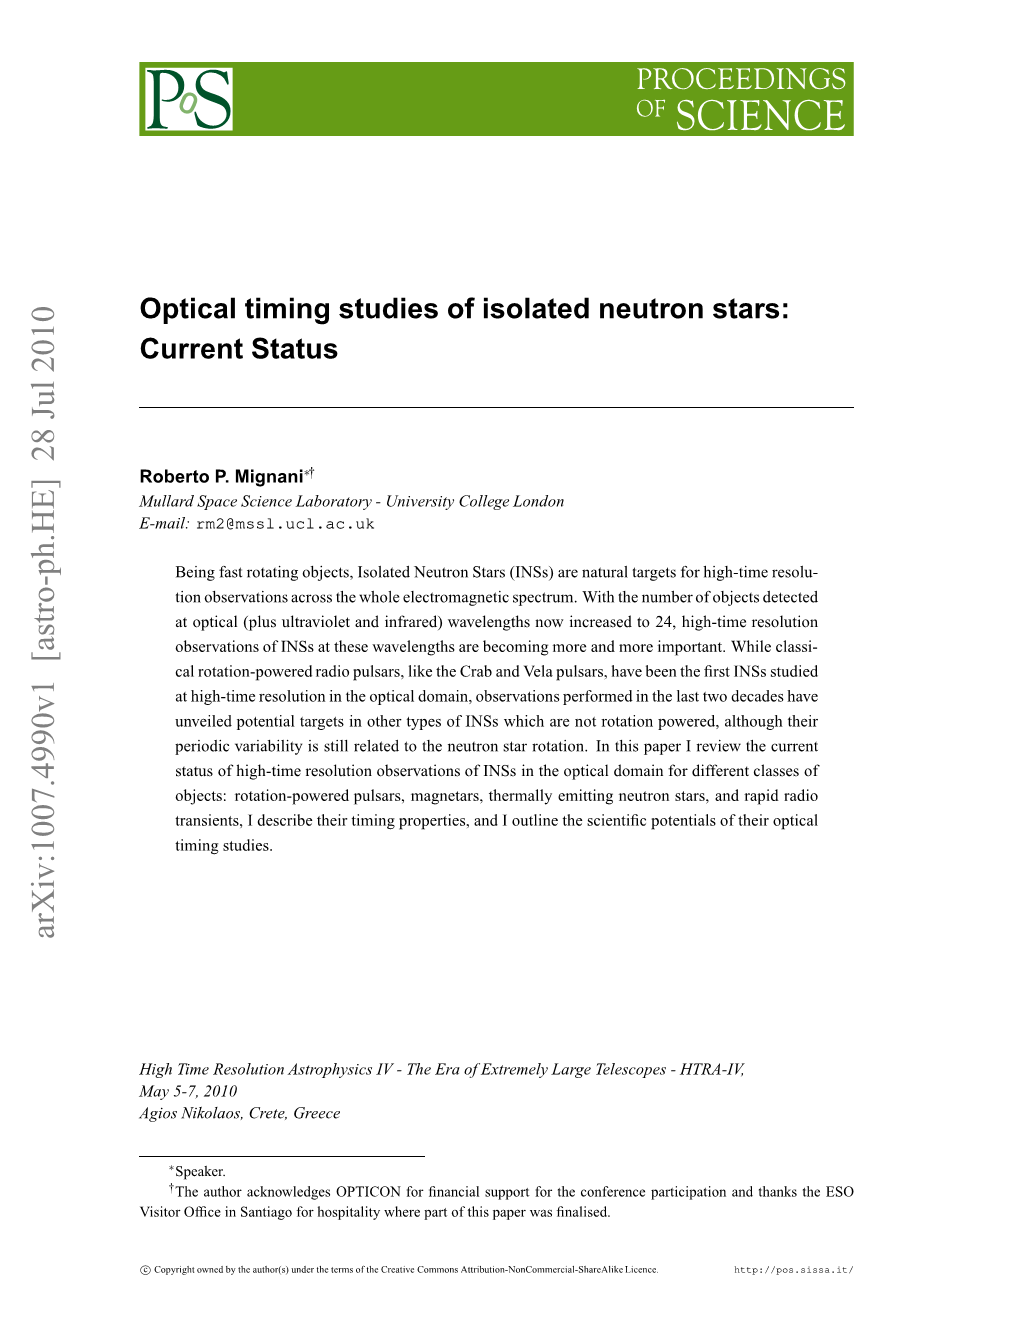 Optical Timing Studies of Isolated Neutron Stars: Current Status